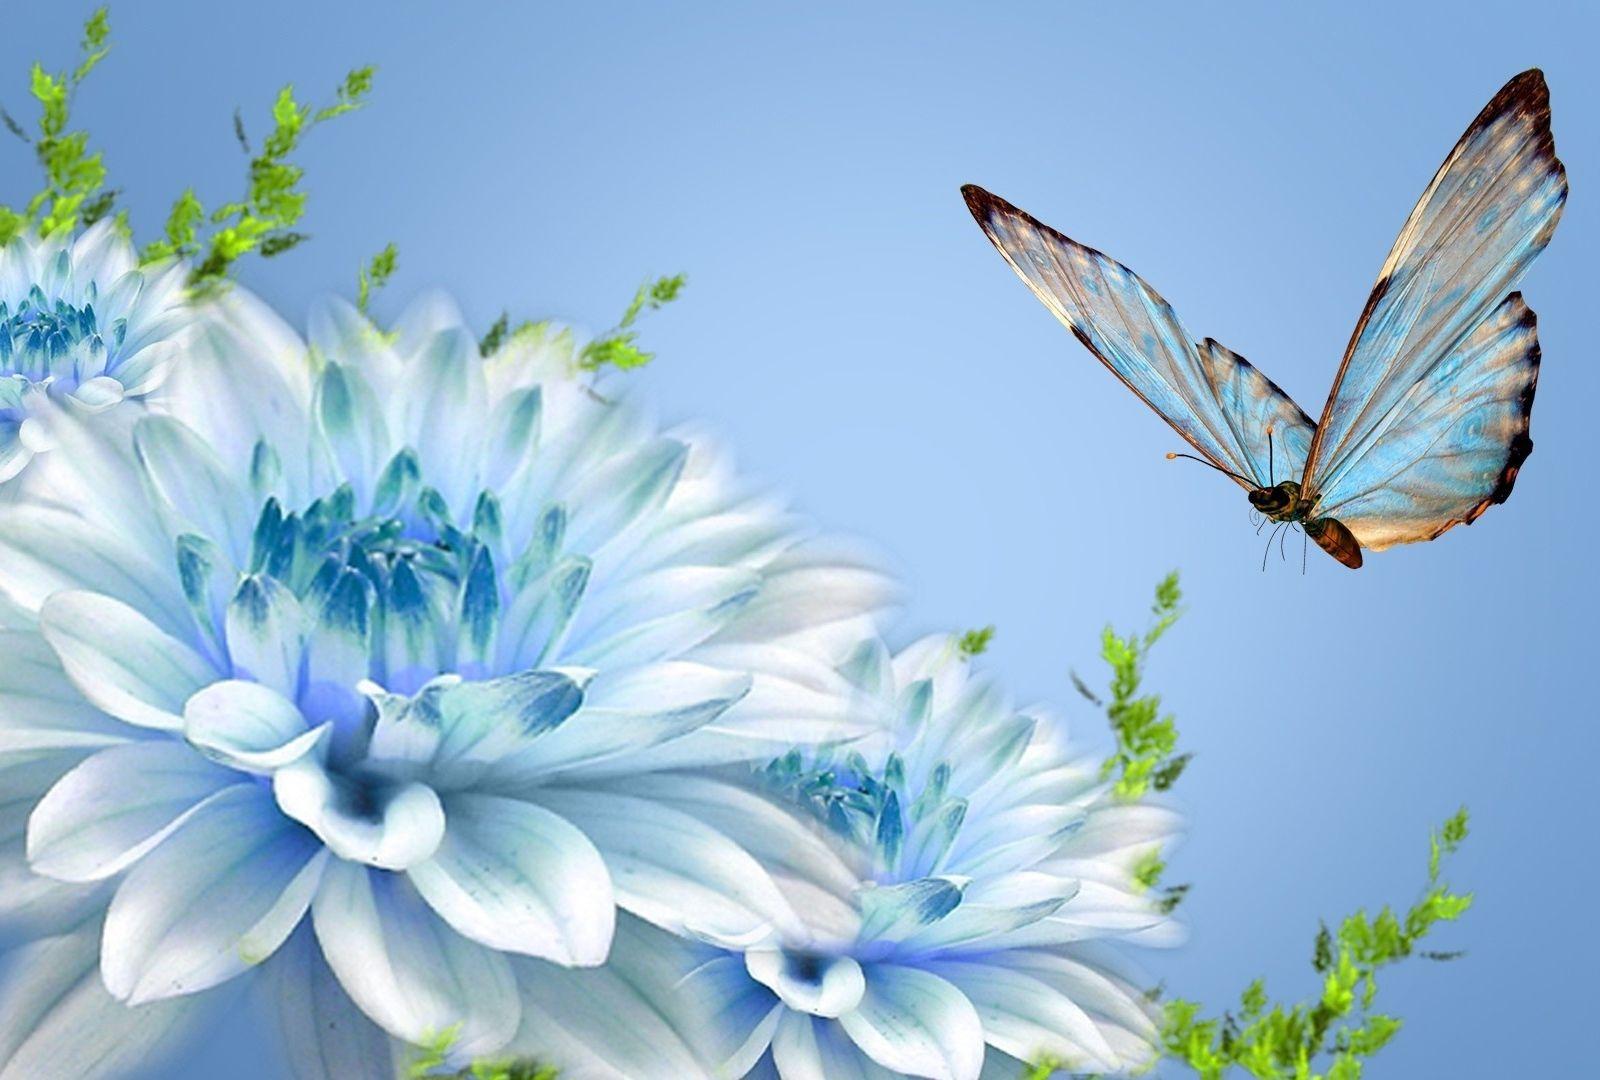 Viceroy Butterfly wallpaper. nature and landscape